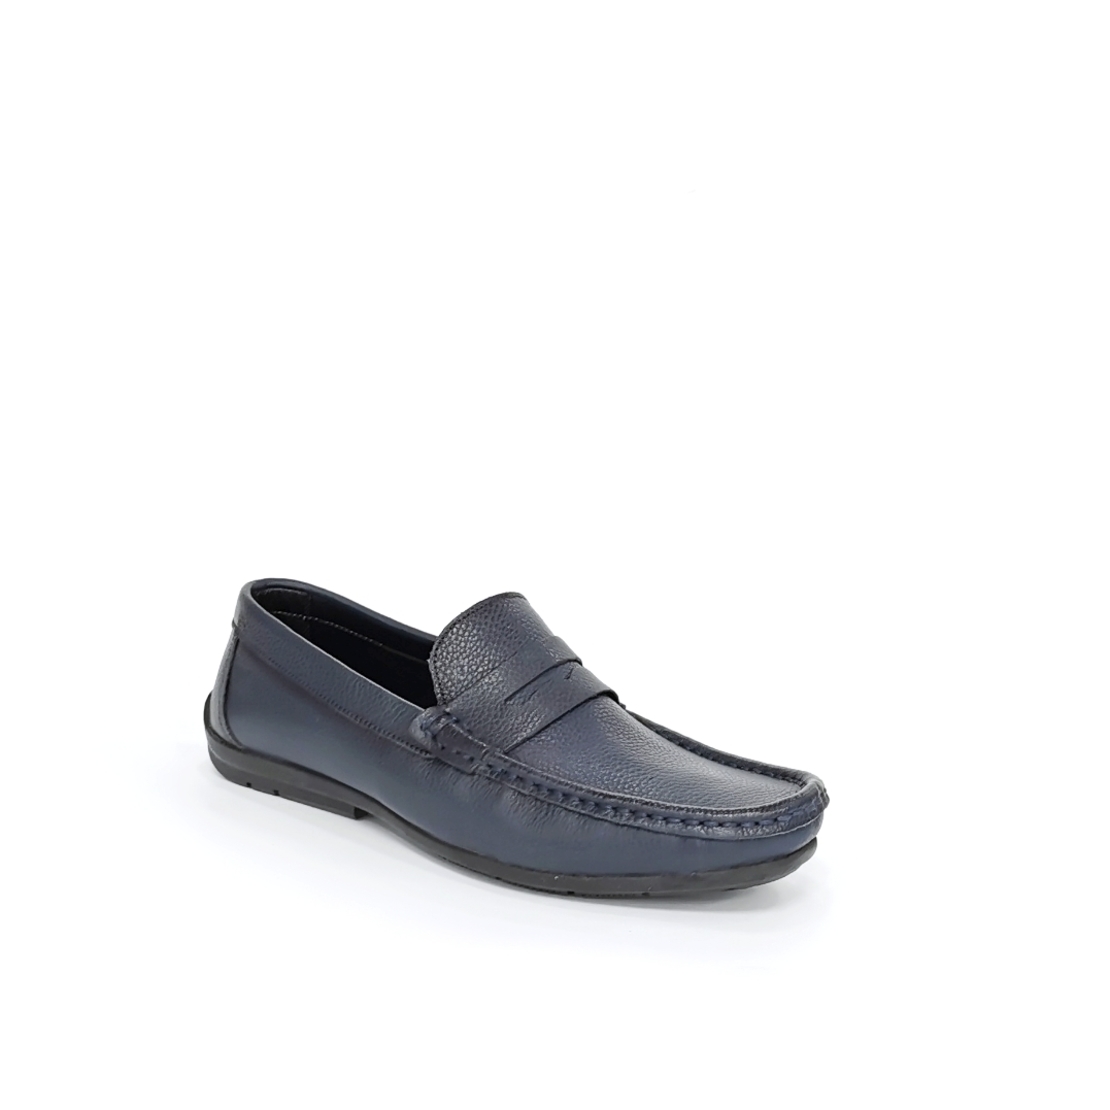 Мen's loafers made of natural leather in the color blue /7456